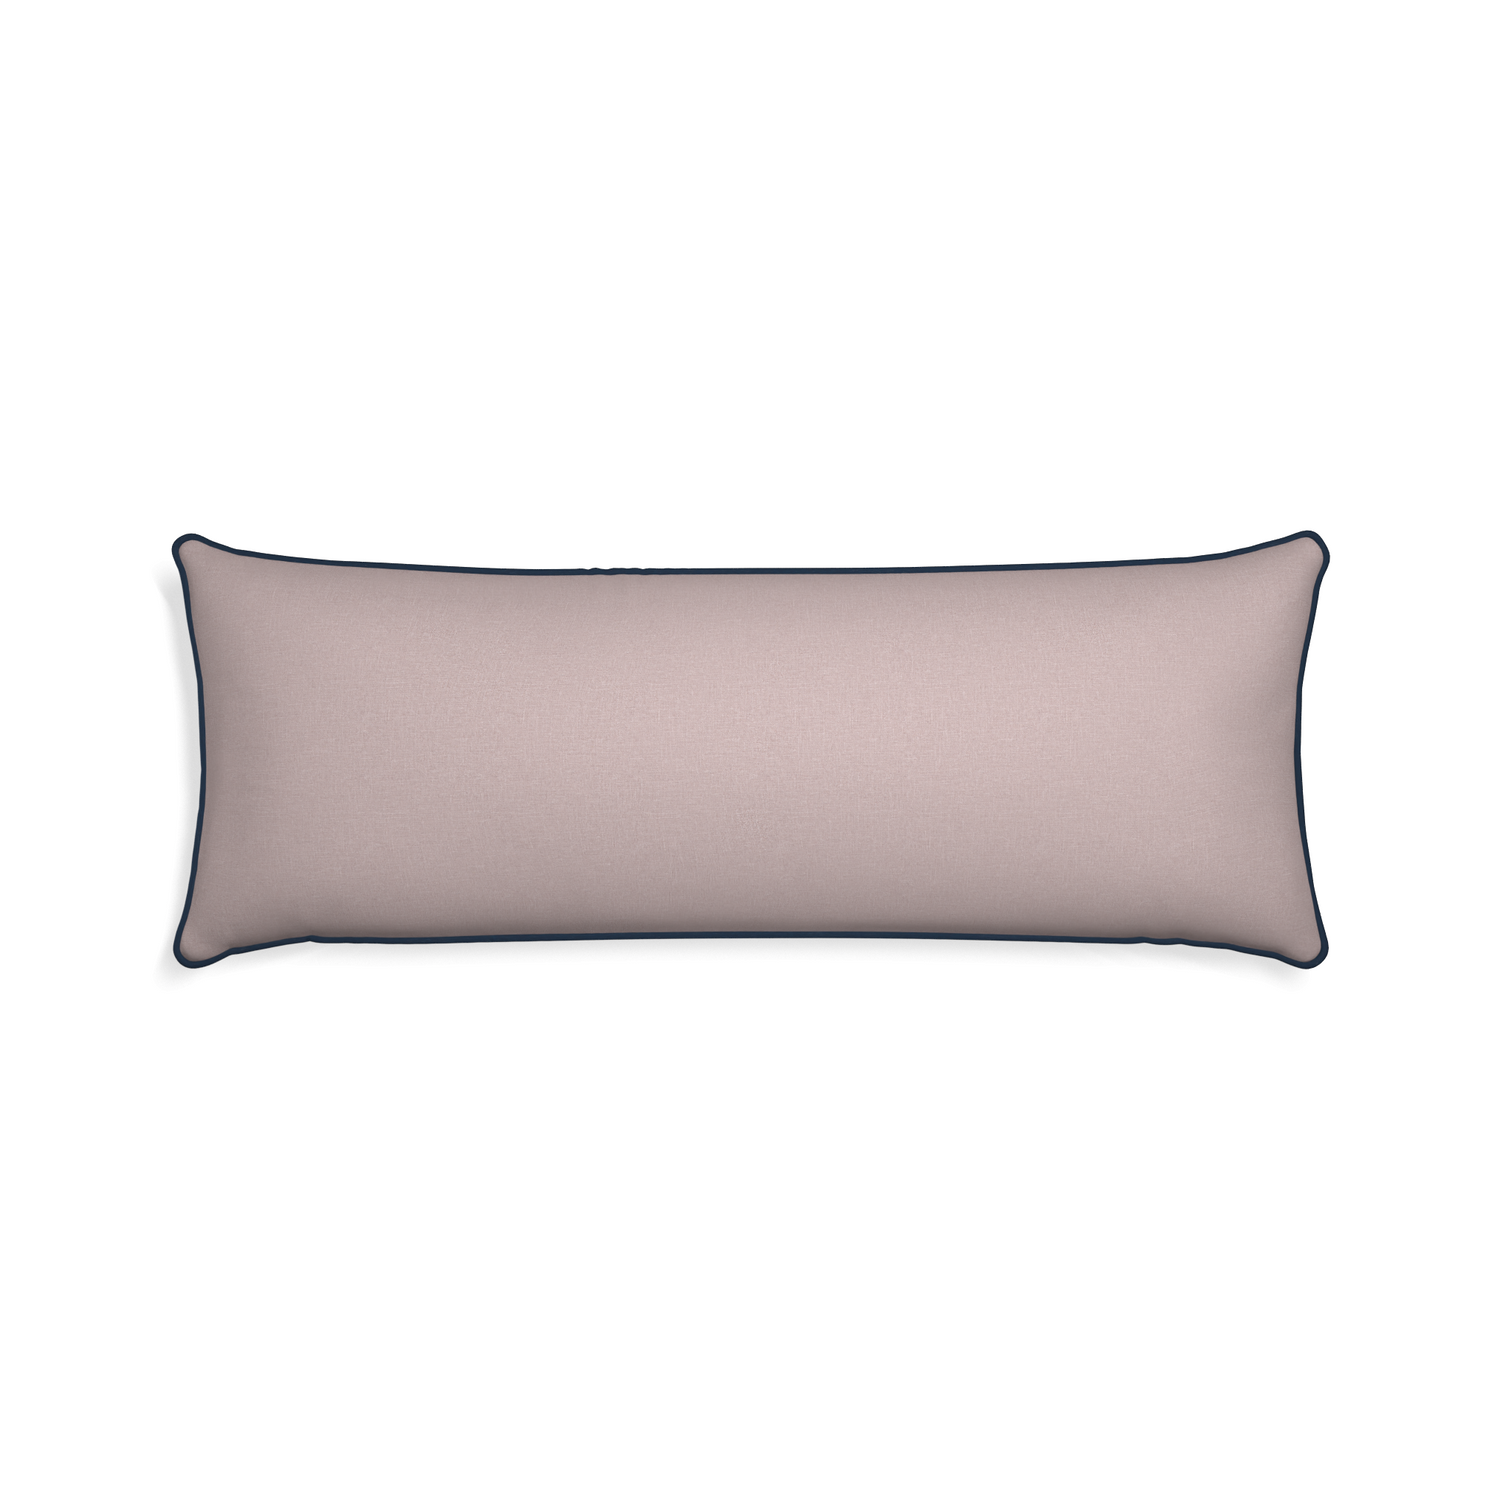 Xl-lumbar orchid custom mauve pinkpillow with c piping on white background